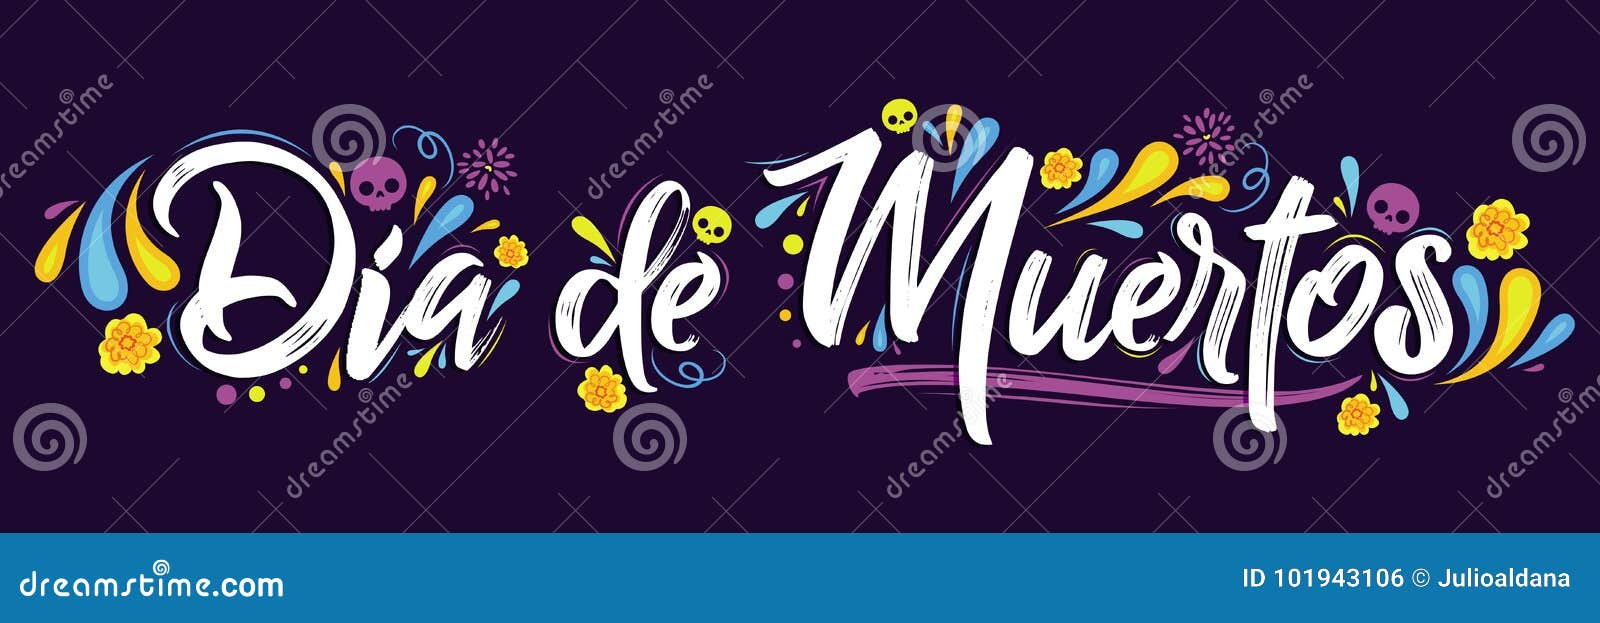 dia de muertos, day of the dead spanish text lettering